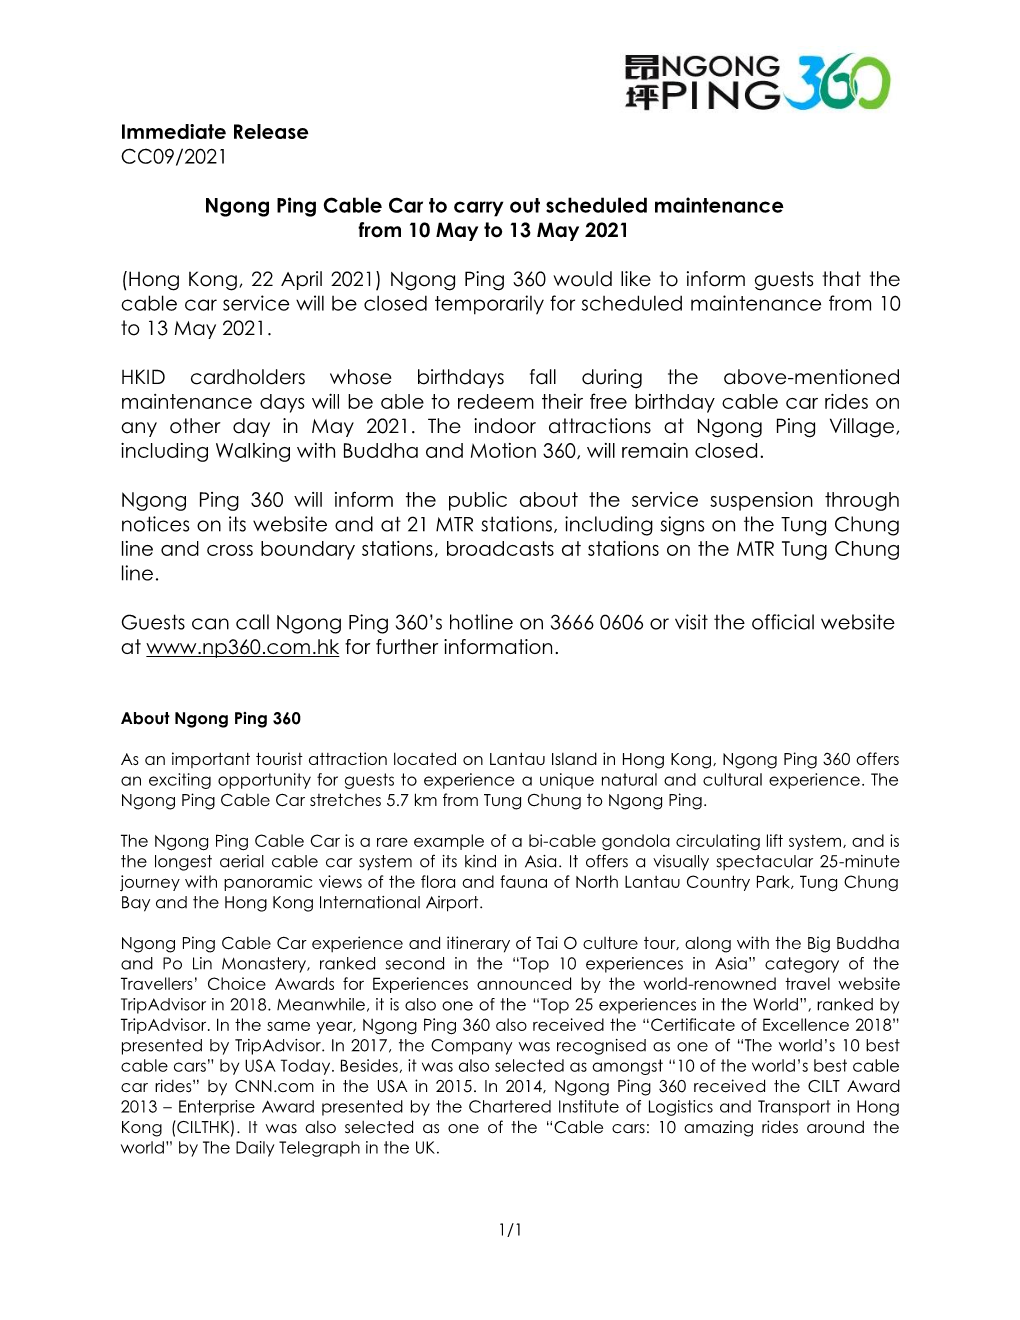 Immediate Release CC09/2021 Ngong Ping Cable Car to Carry Out